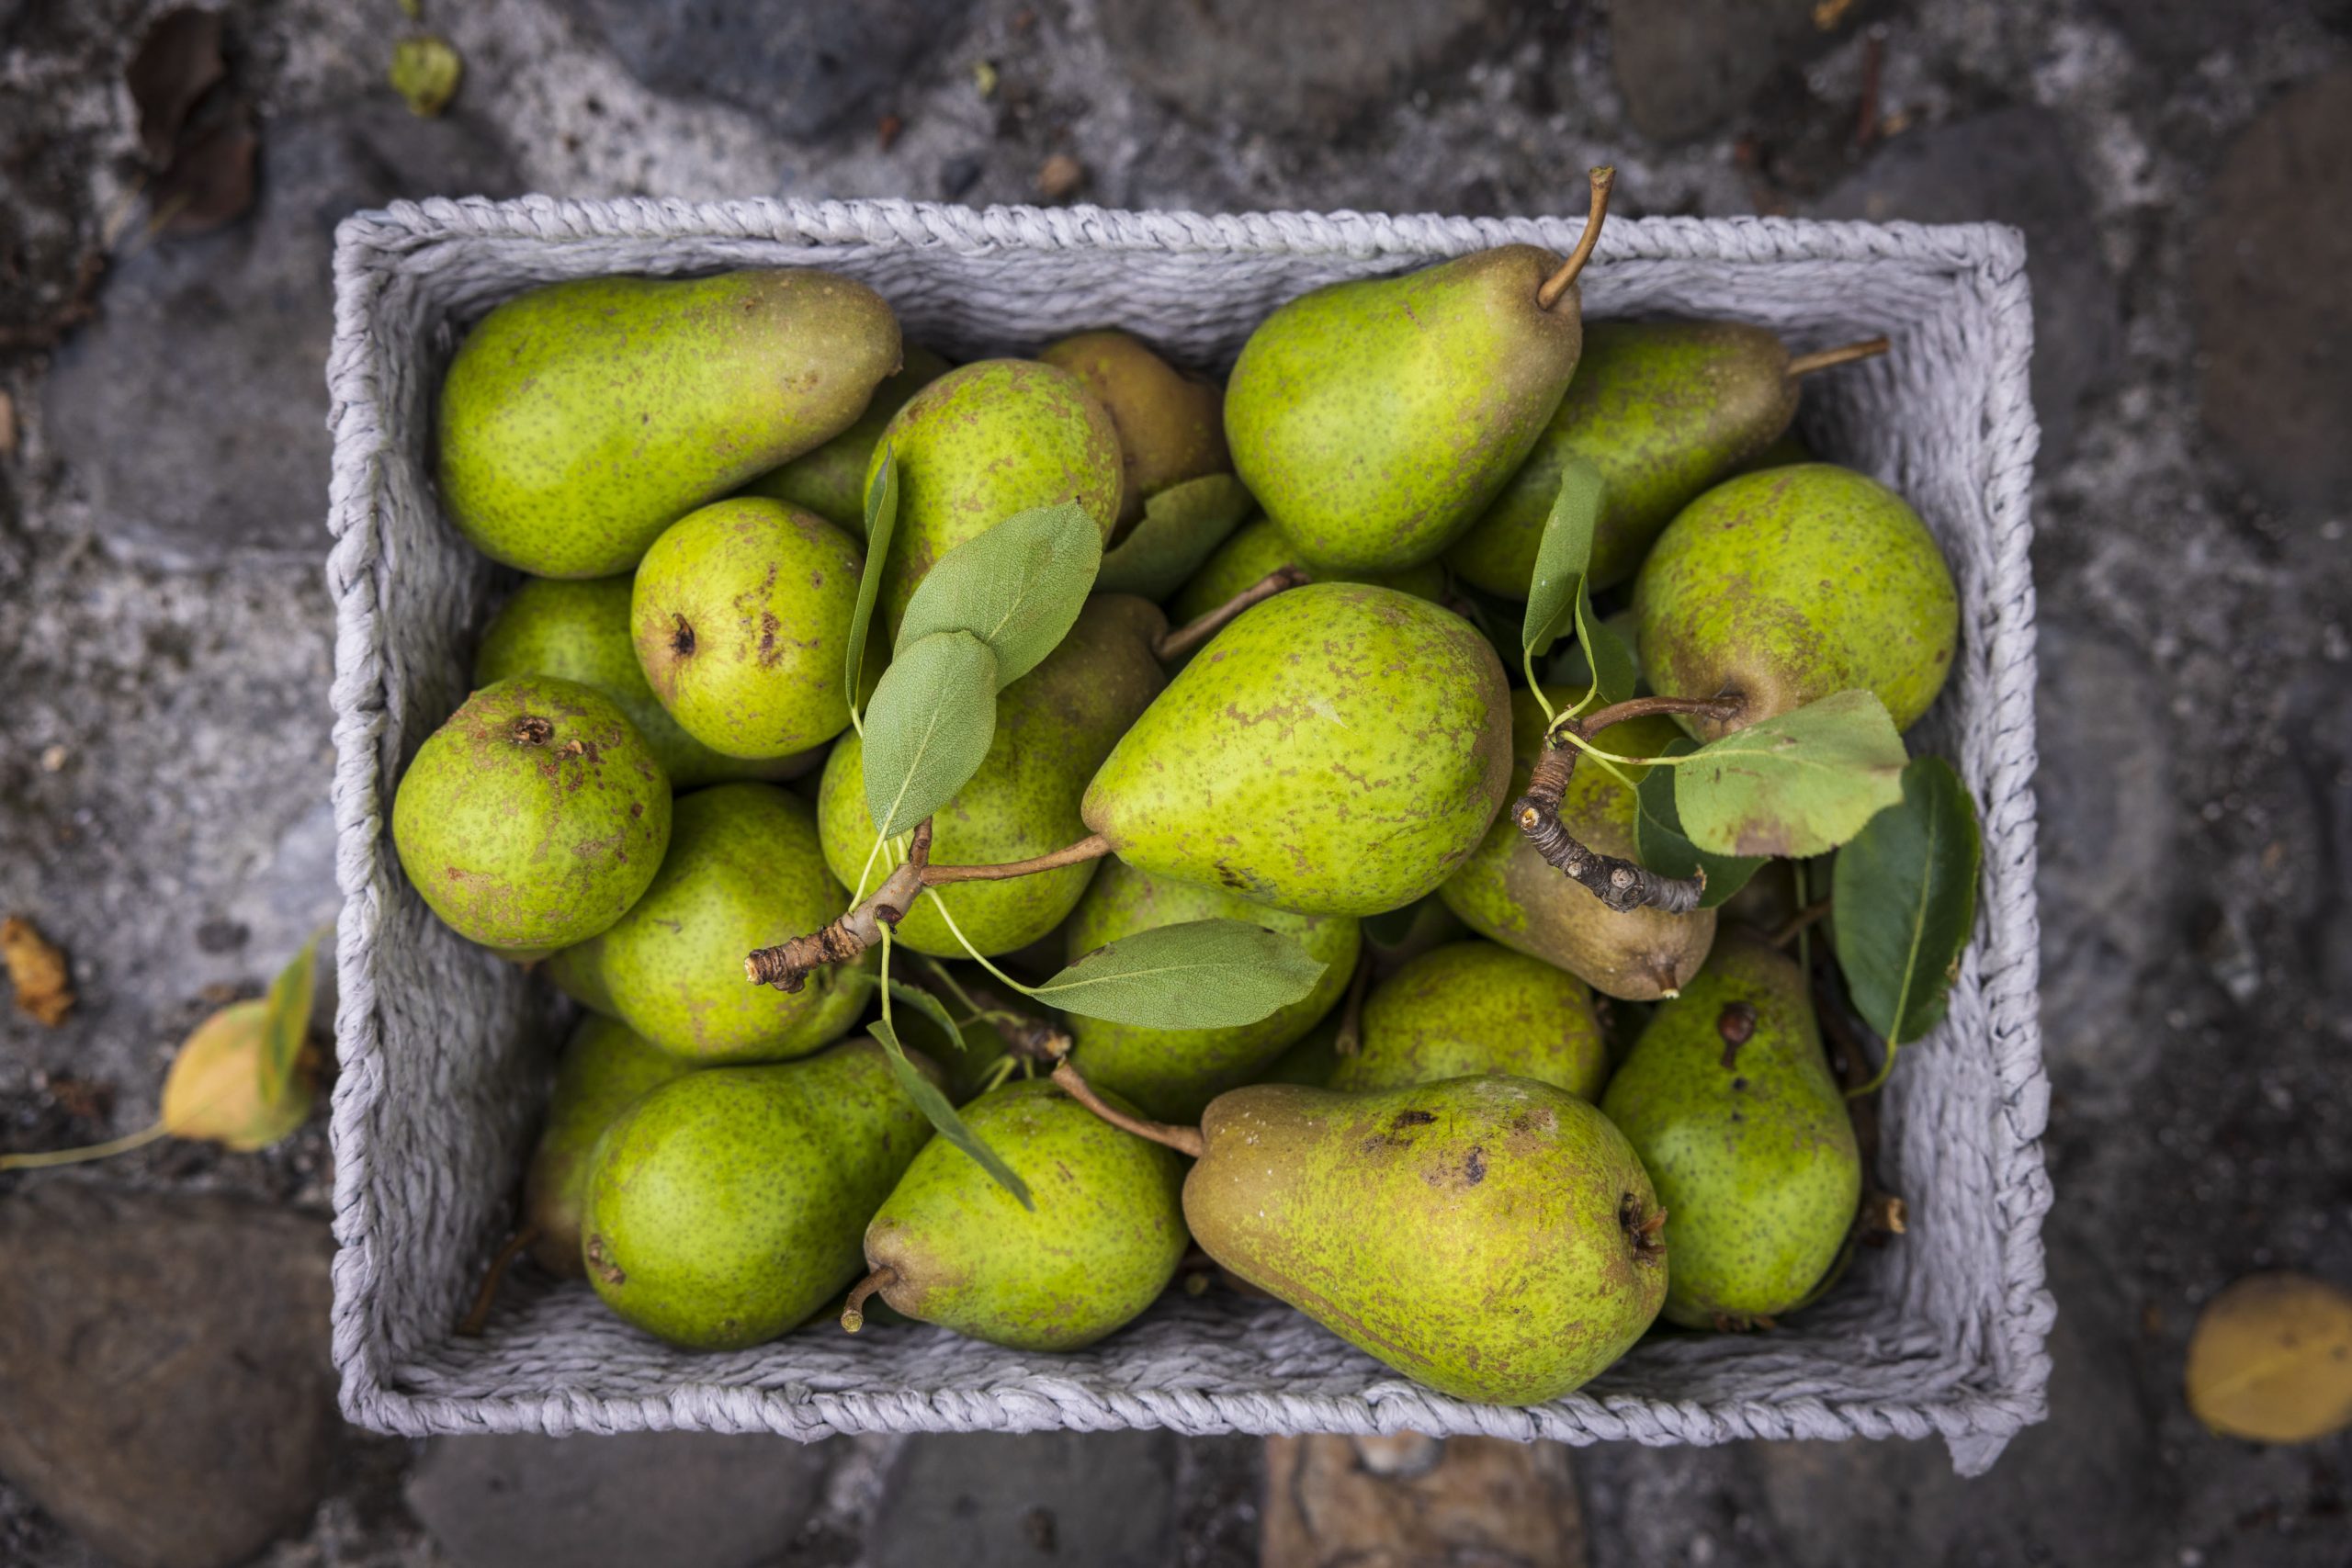 A square basket, full of green pears that were harvested from the tree at The Digital Hub